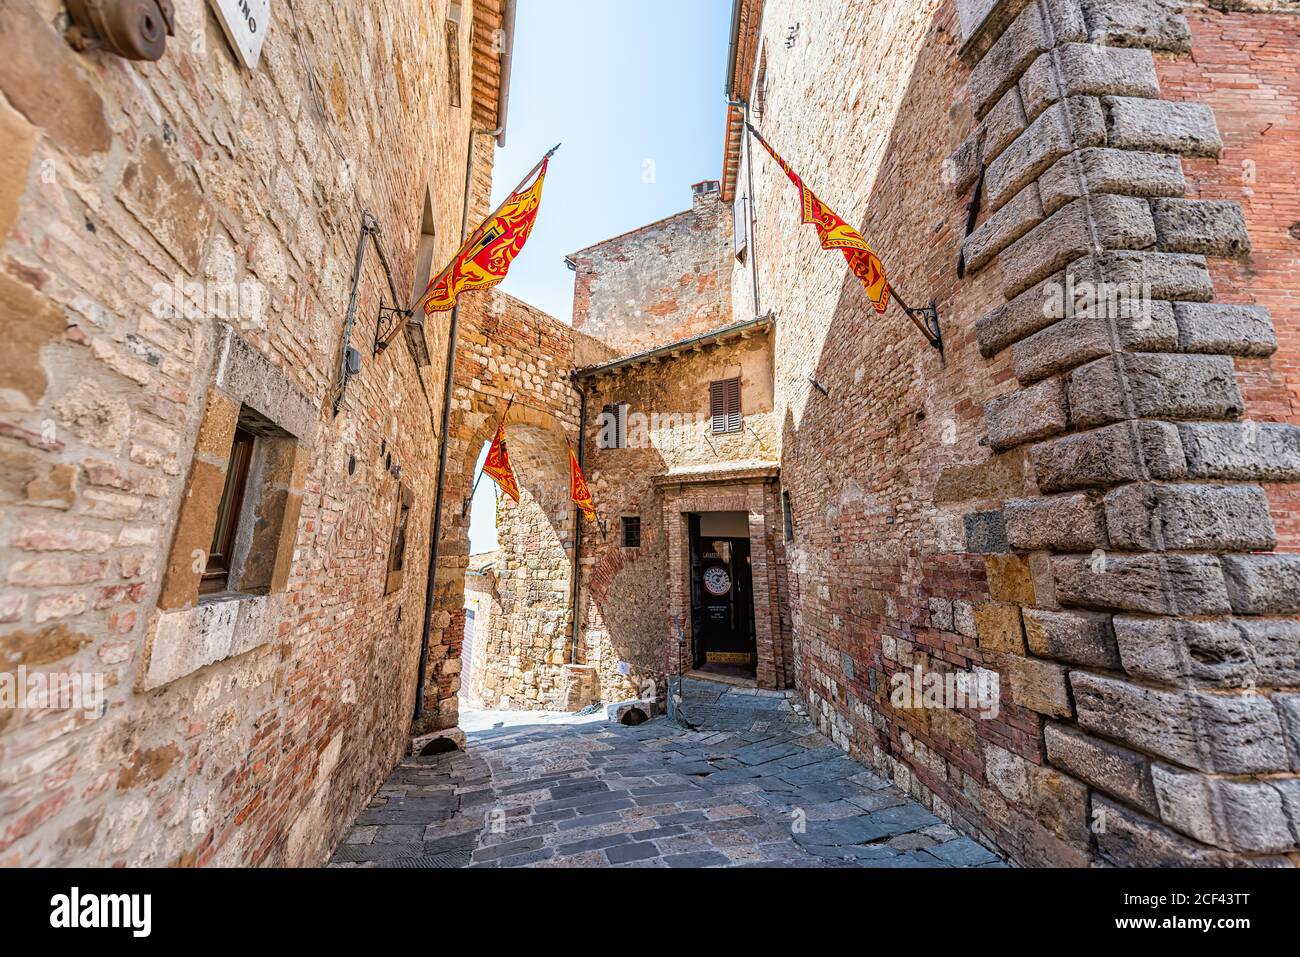 Montepulciano, Italy - August 28, 2018: Narrow alley empty street path in small town village in Tuscany with flags and entrance to laundry laundromat Stock Photo